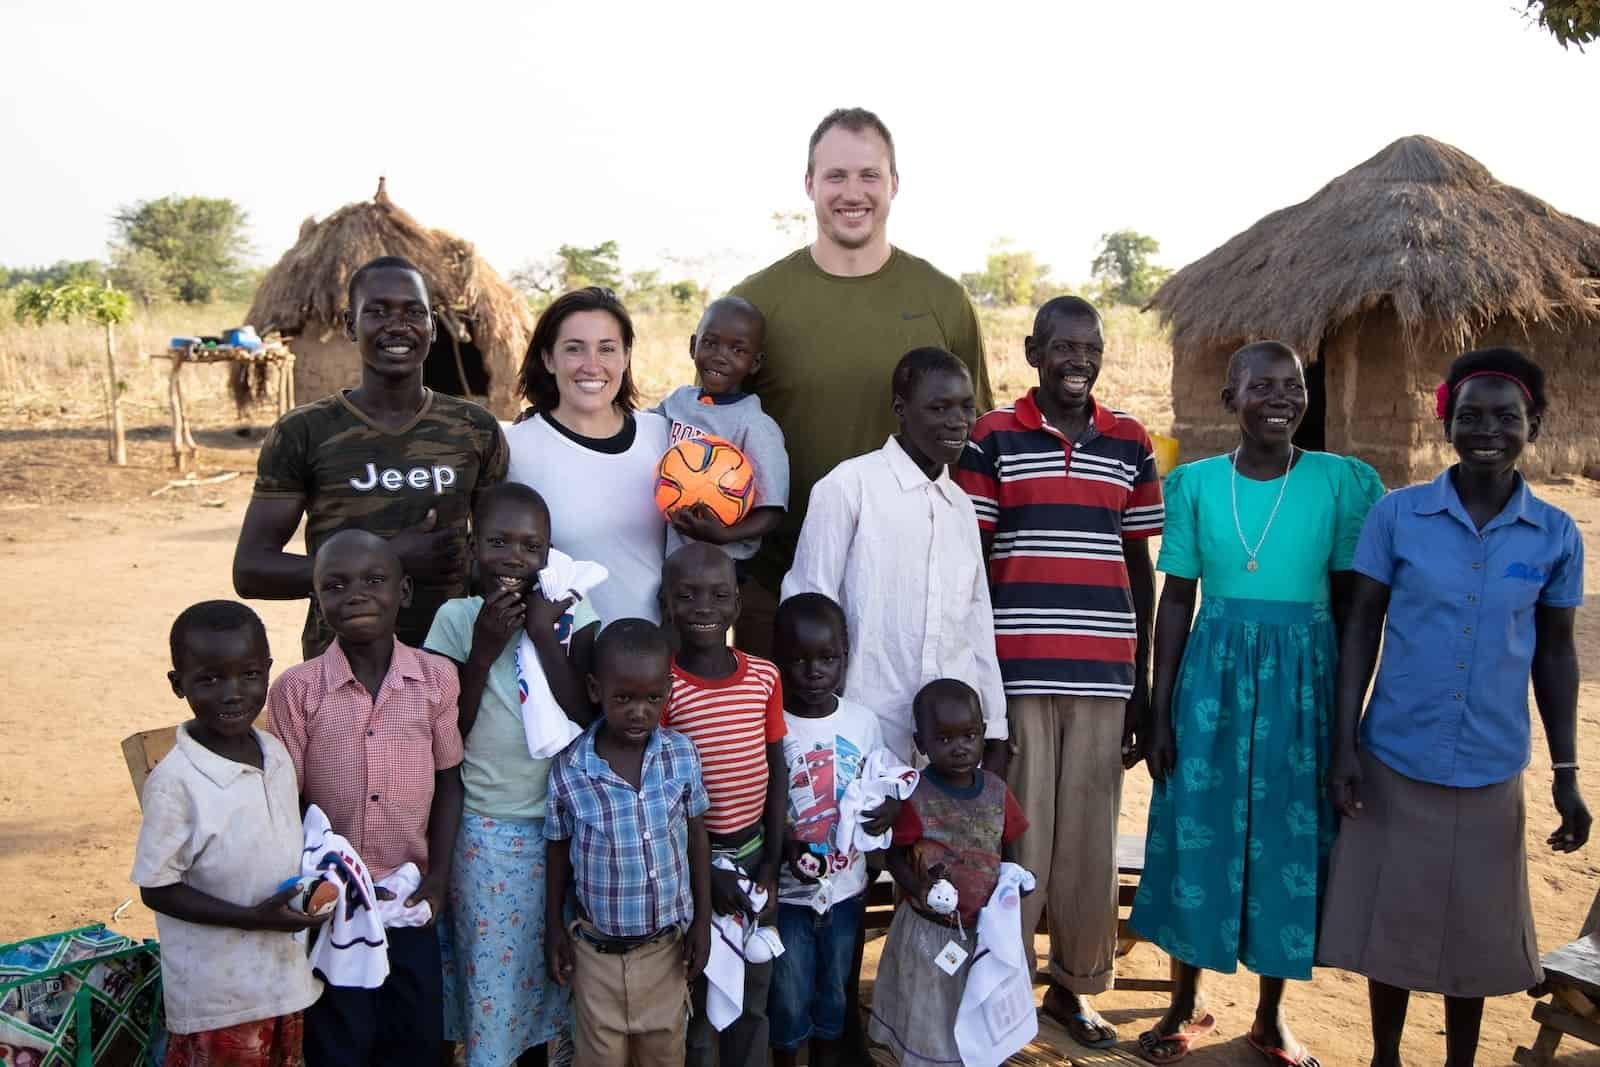 A group of people, Ugandans and two Americans, Nate Solder and his wife, stand outside with grass thatched huts in the background, everyone smiling at the camera.